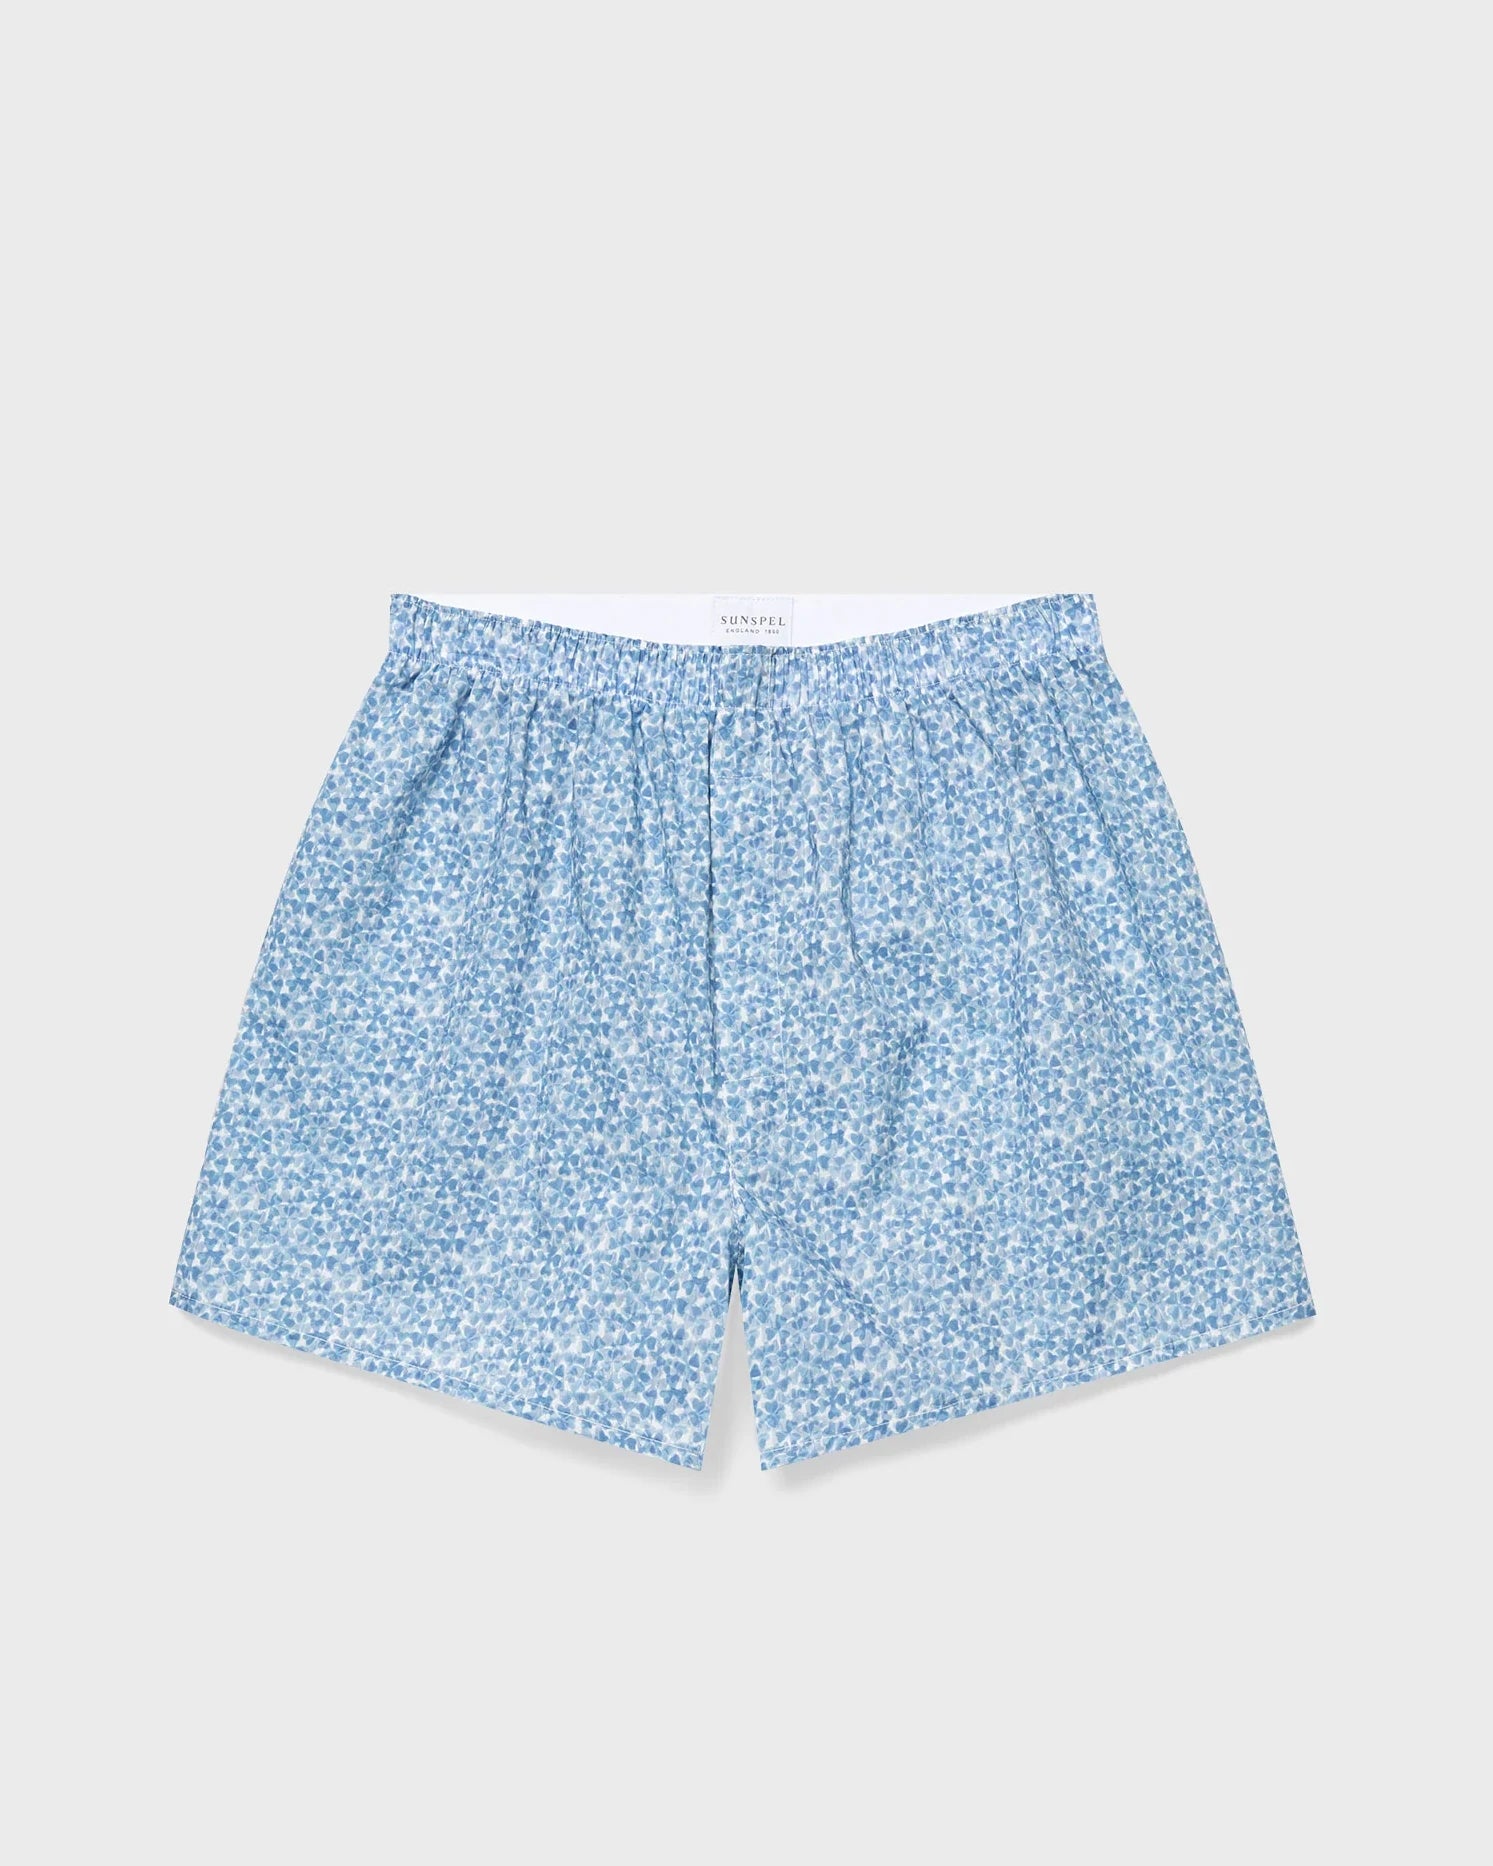 Classic Boxer Short in Liberty Fabric - Blue Cover